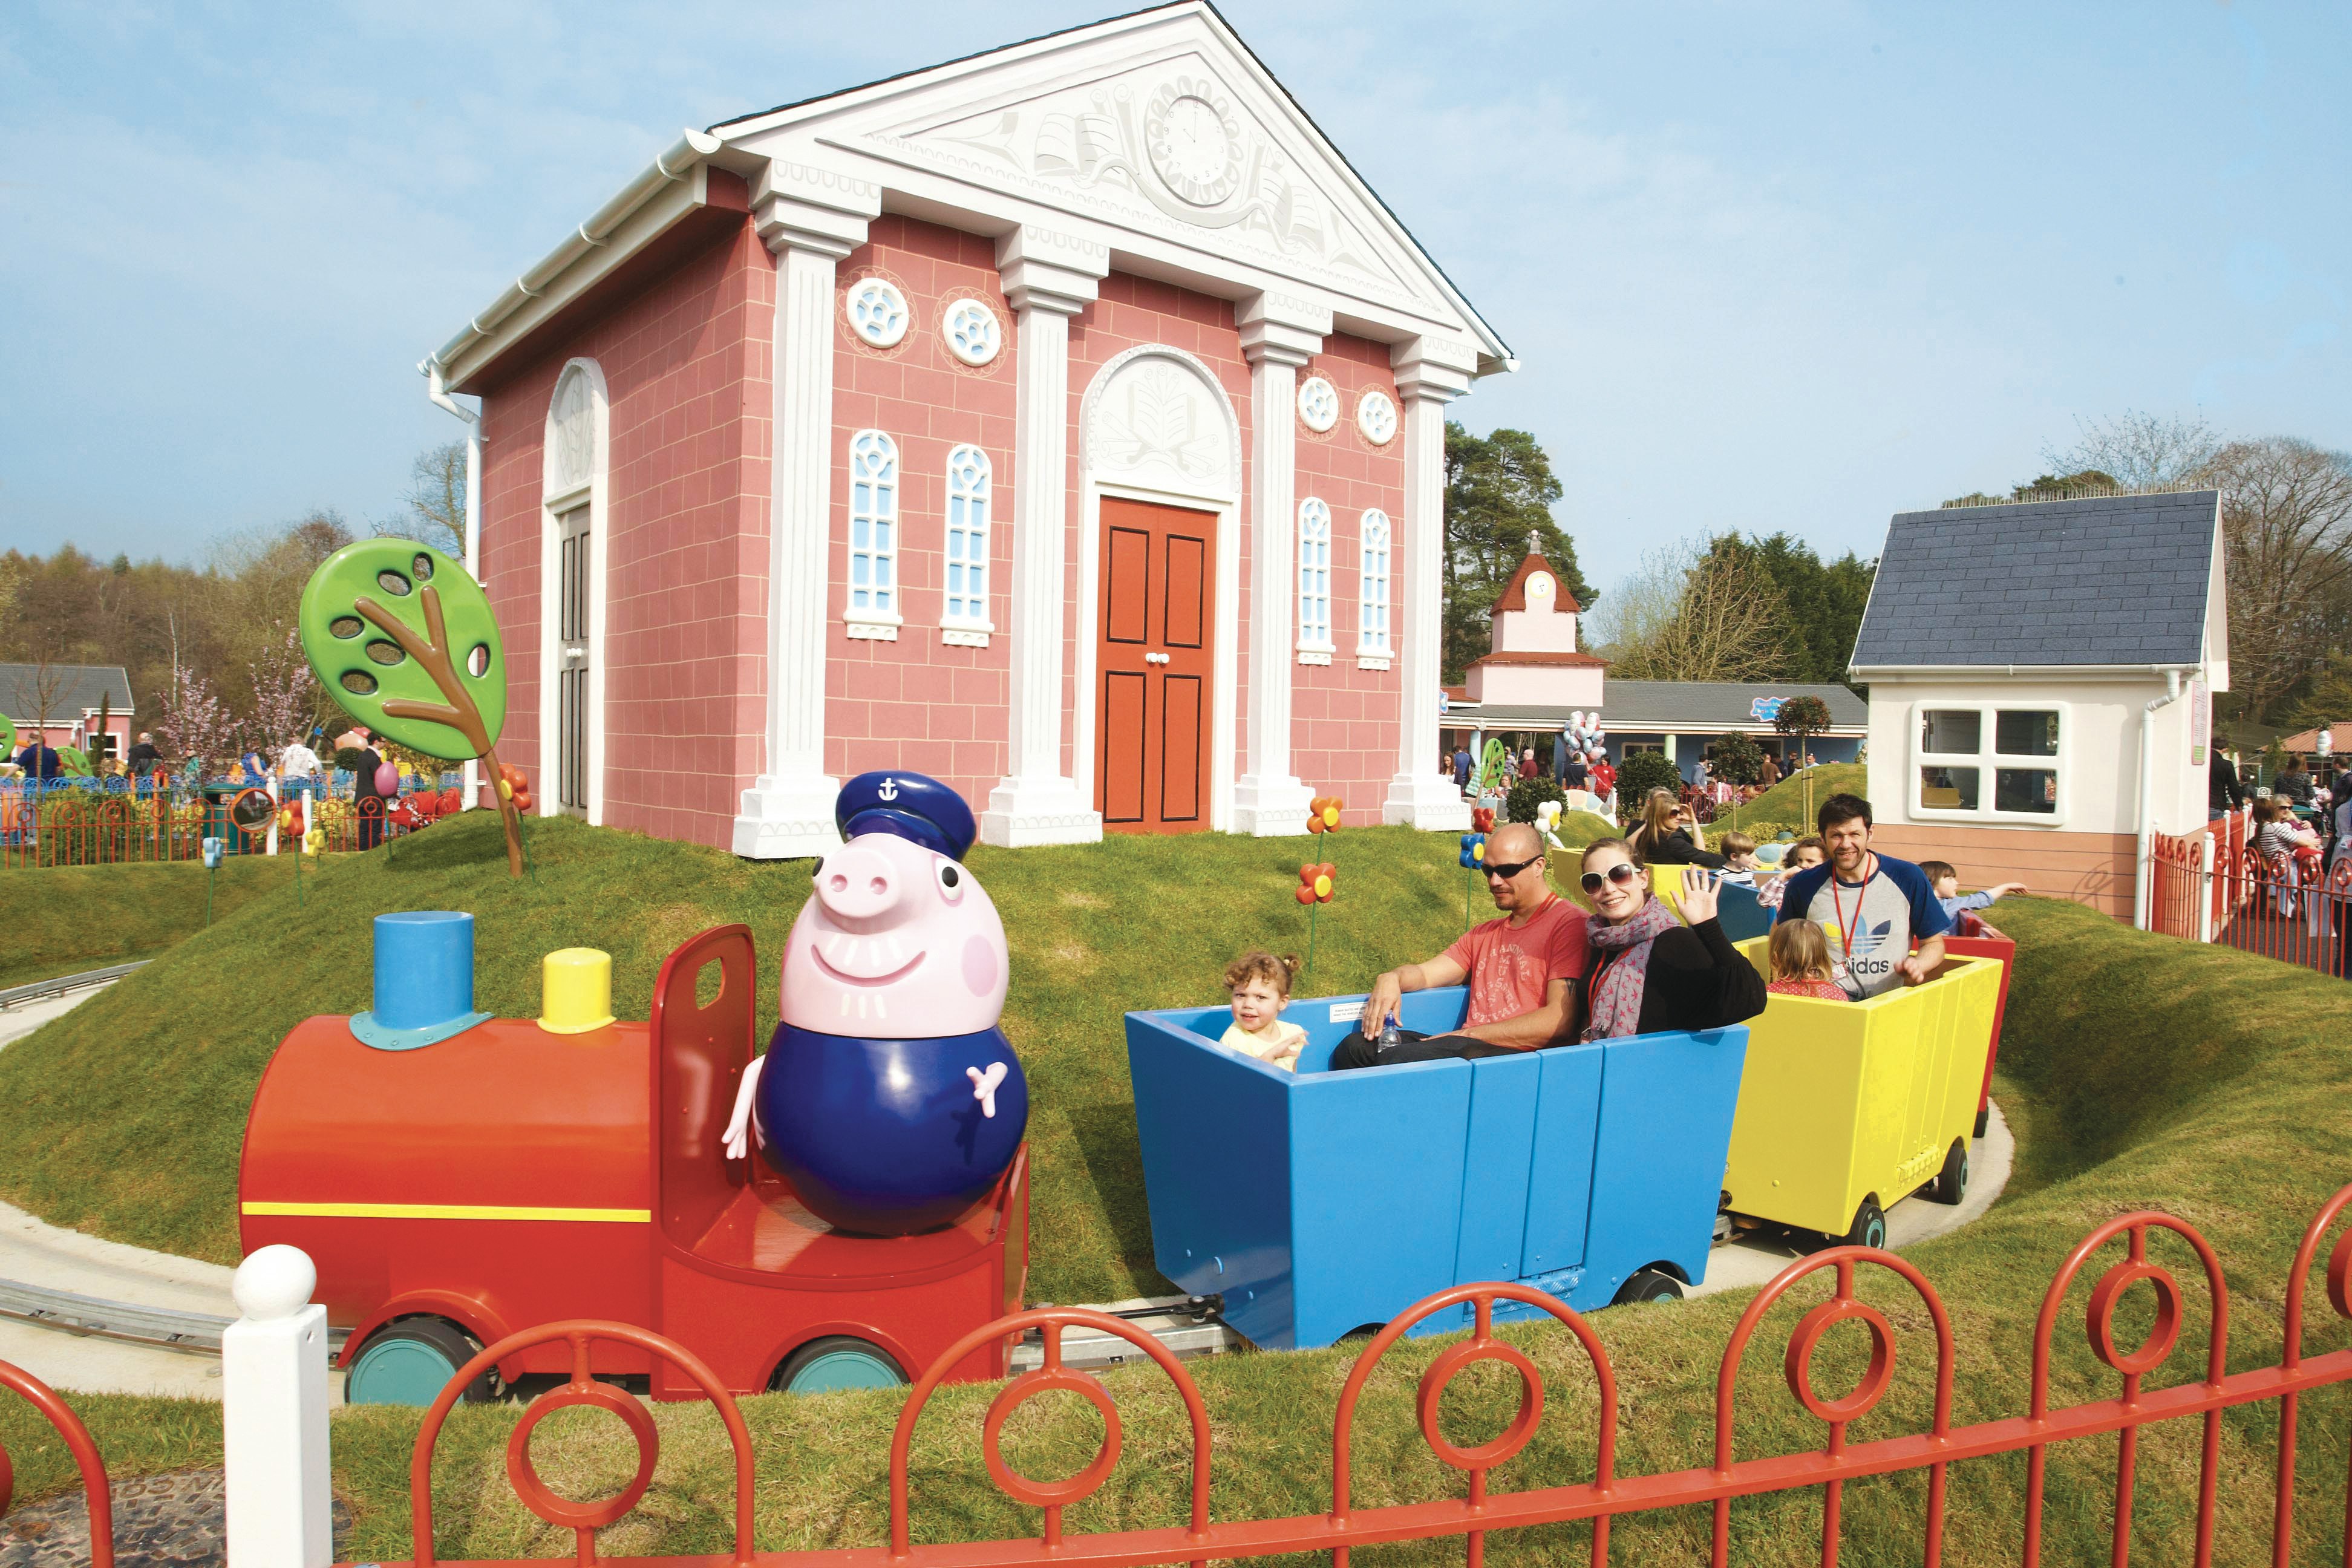 What to Expect at The World's First Peppa Pig Theme Park